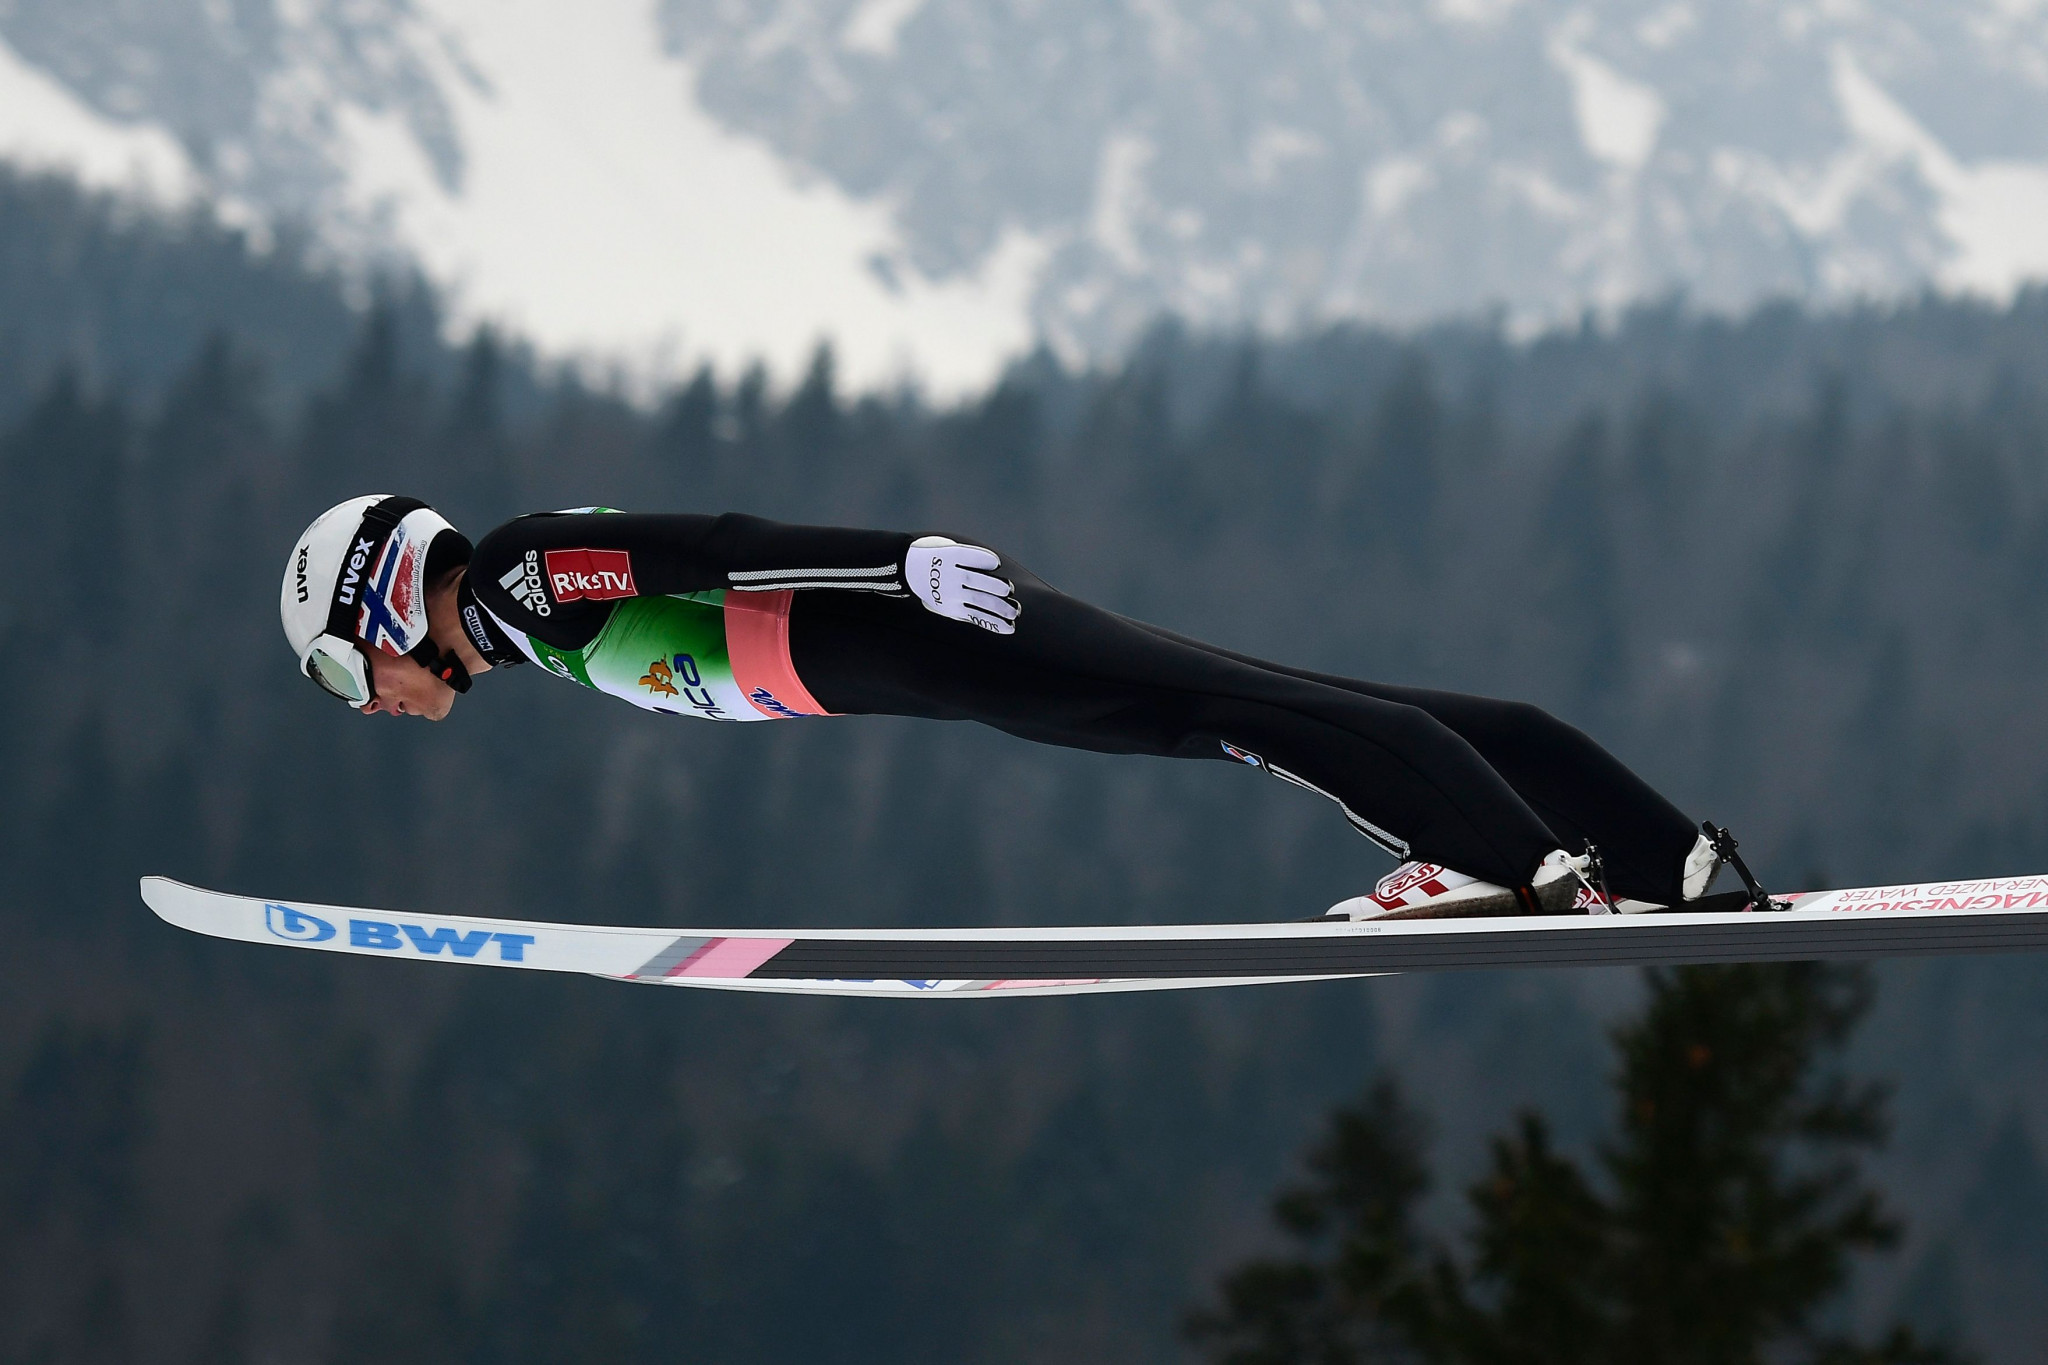 Forfang wins FIS Ski Jumping World Cup event in Nizhny Tagil